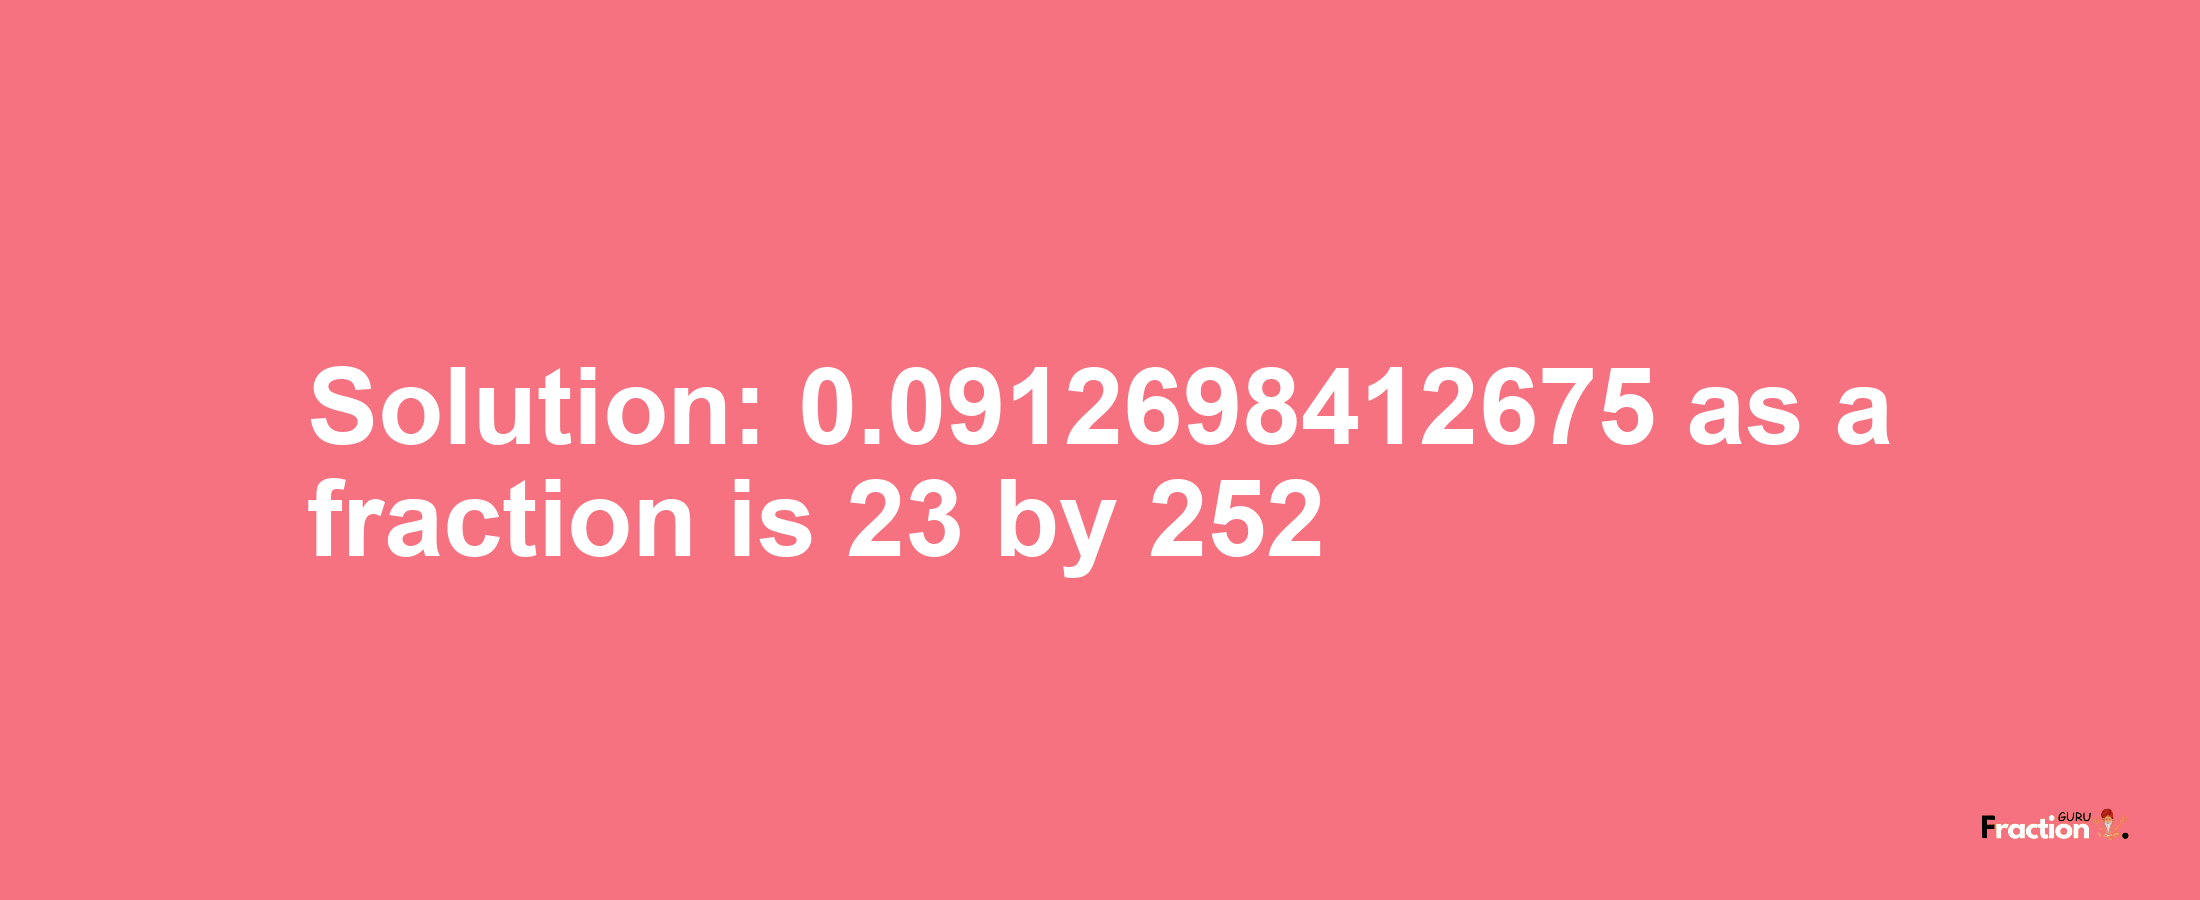 Solution:0.0912698412675 as a fraction is 23/252